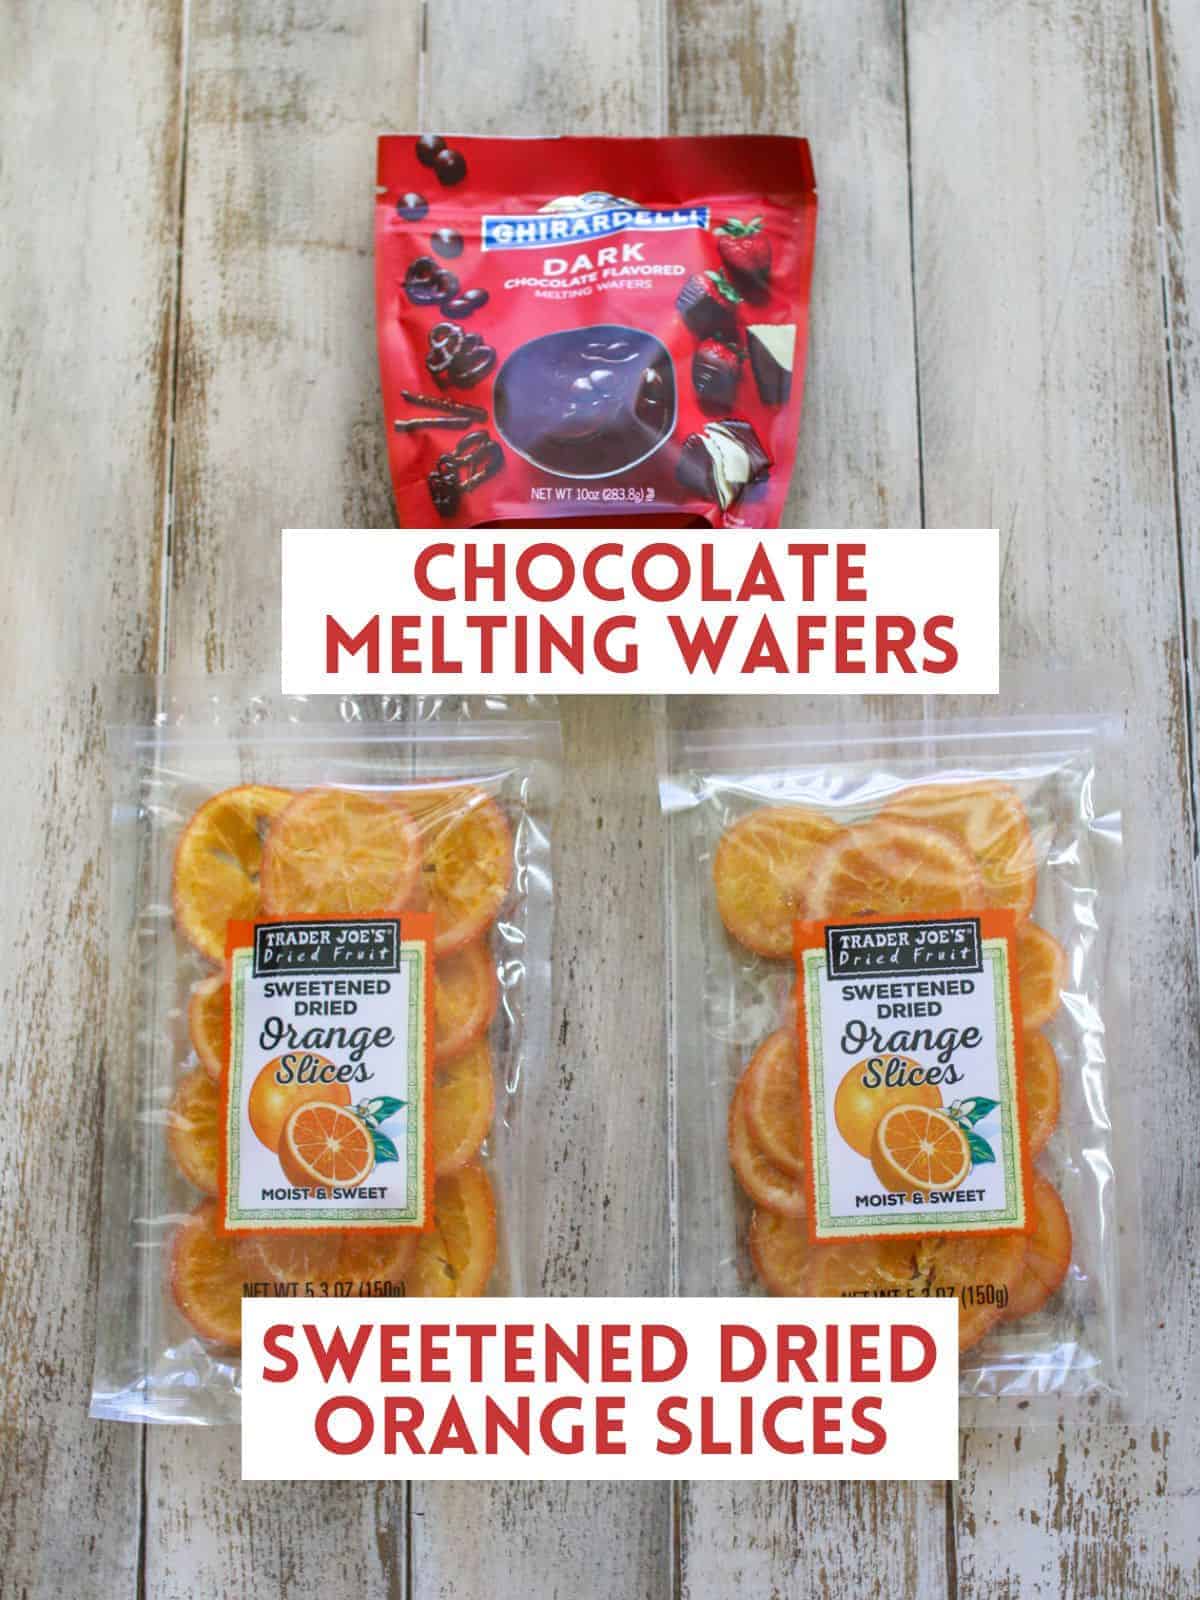 A red bag of chocolate melting wafers and below are two bags of sweetened dried orange slices. Both on a wood background and each labeled with a white rectangle box with dark red text in all caps.